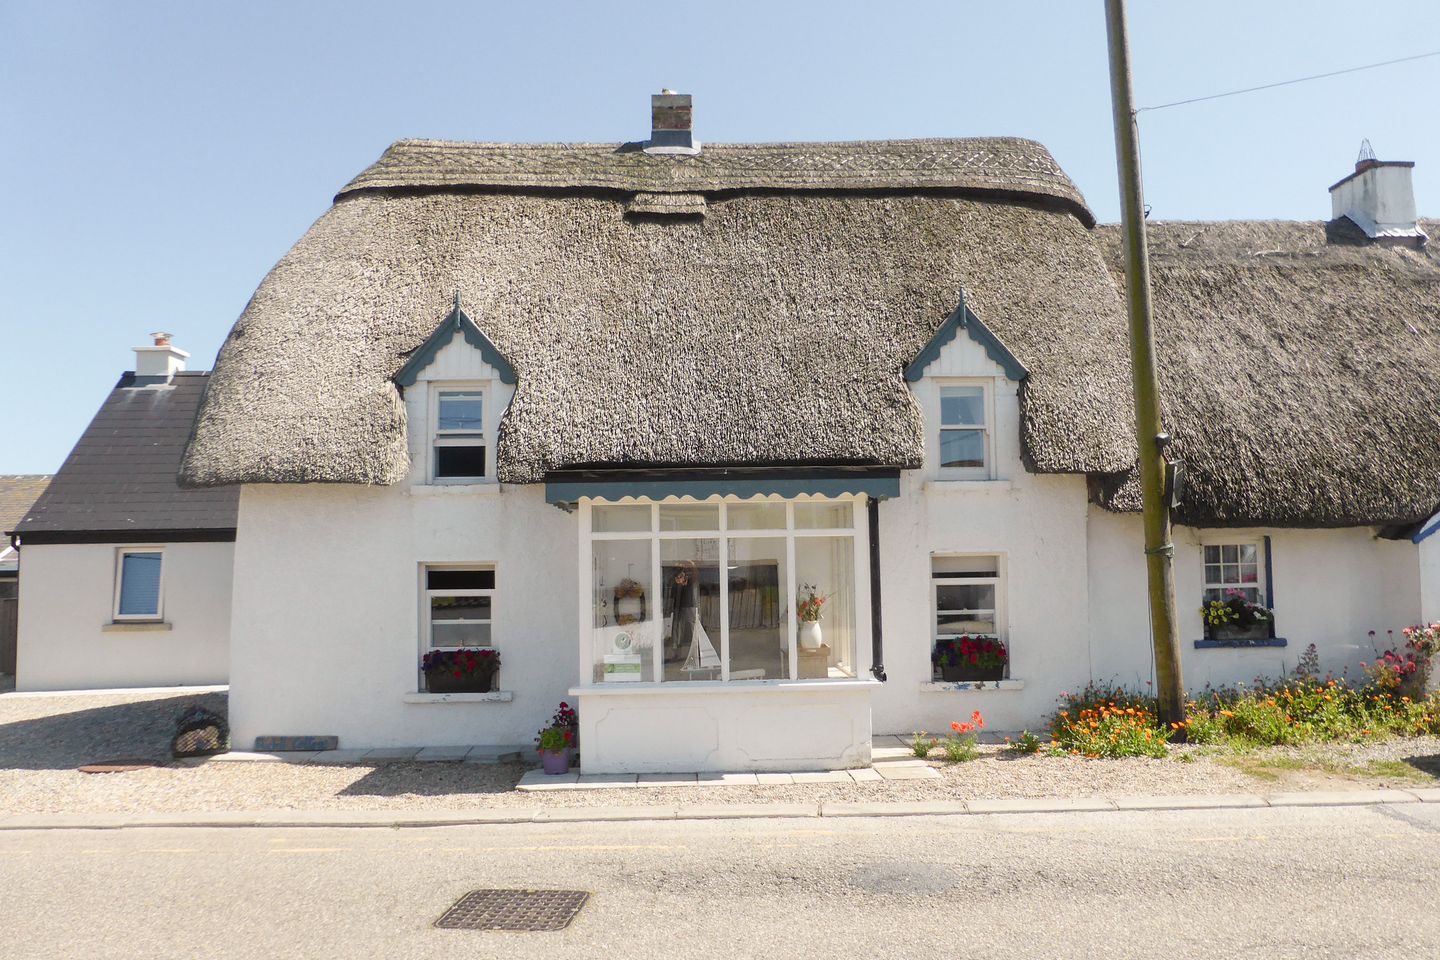 Ref. 1039027 BLUEBELL COTTAGE, BLUEBELL COTTAGE, N, Kilmore Quay, Co. Wexford